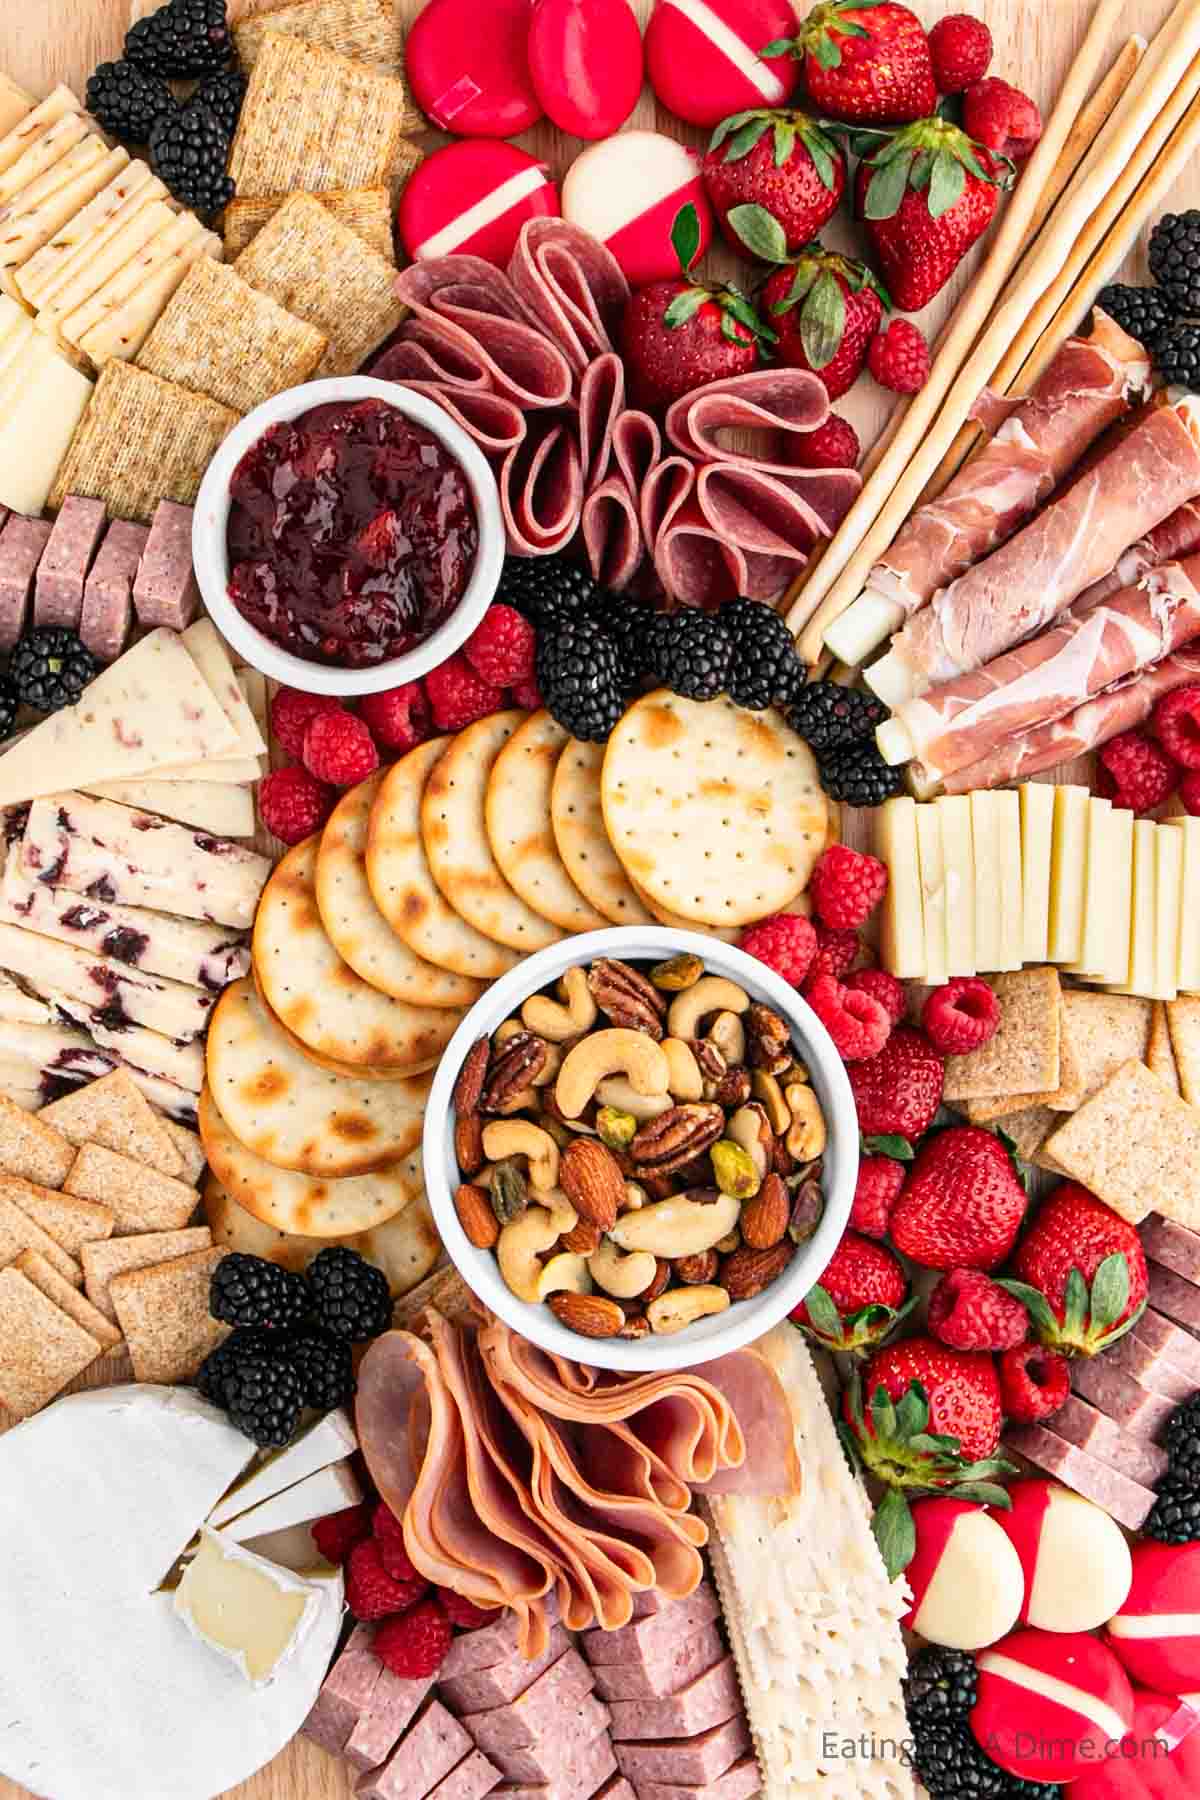 How to make a Simple Charcuterie Board - Veronika's Kitchen